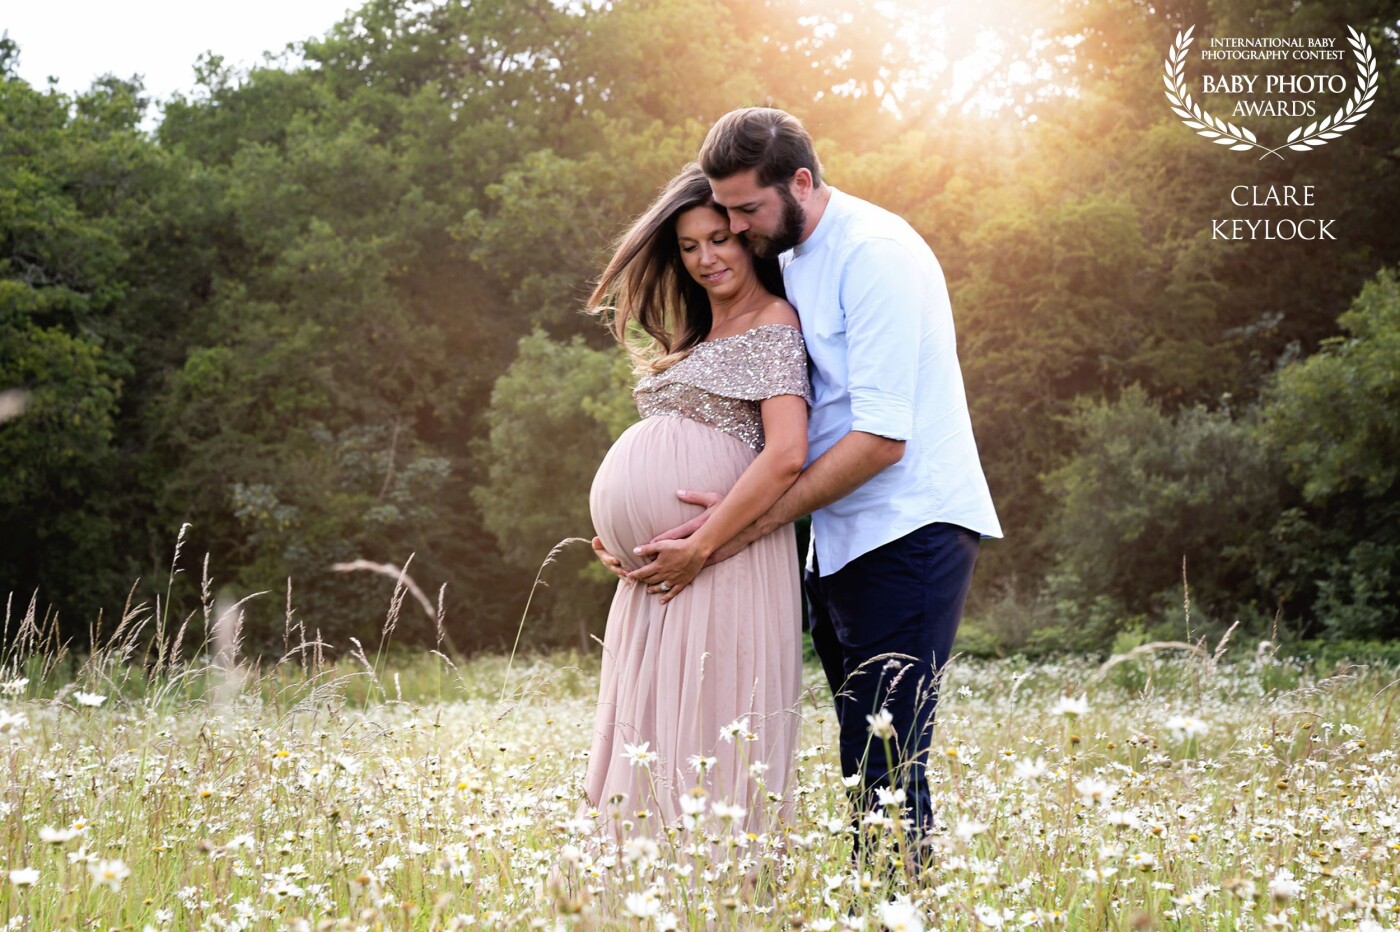 I absolutely loved photographing this beautiful couple. So honored to record this magical time for them. We had such a lovely afternoon in the gorgeous wildflower field.  Everything was perfect, the lighting, the field, her beautiful bump. Since this photo they have welcomed two beautiful little girls, I can't wait to photograph them all next week.